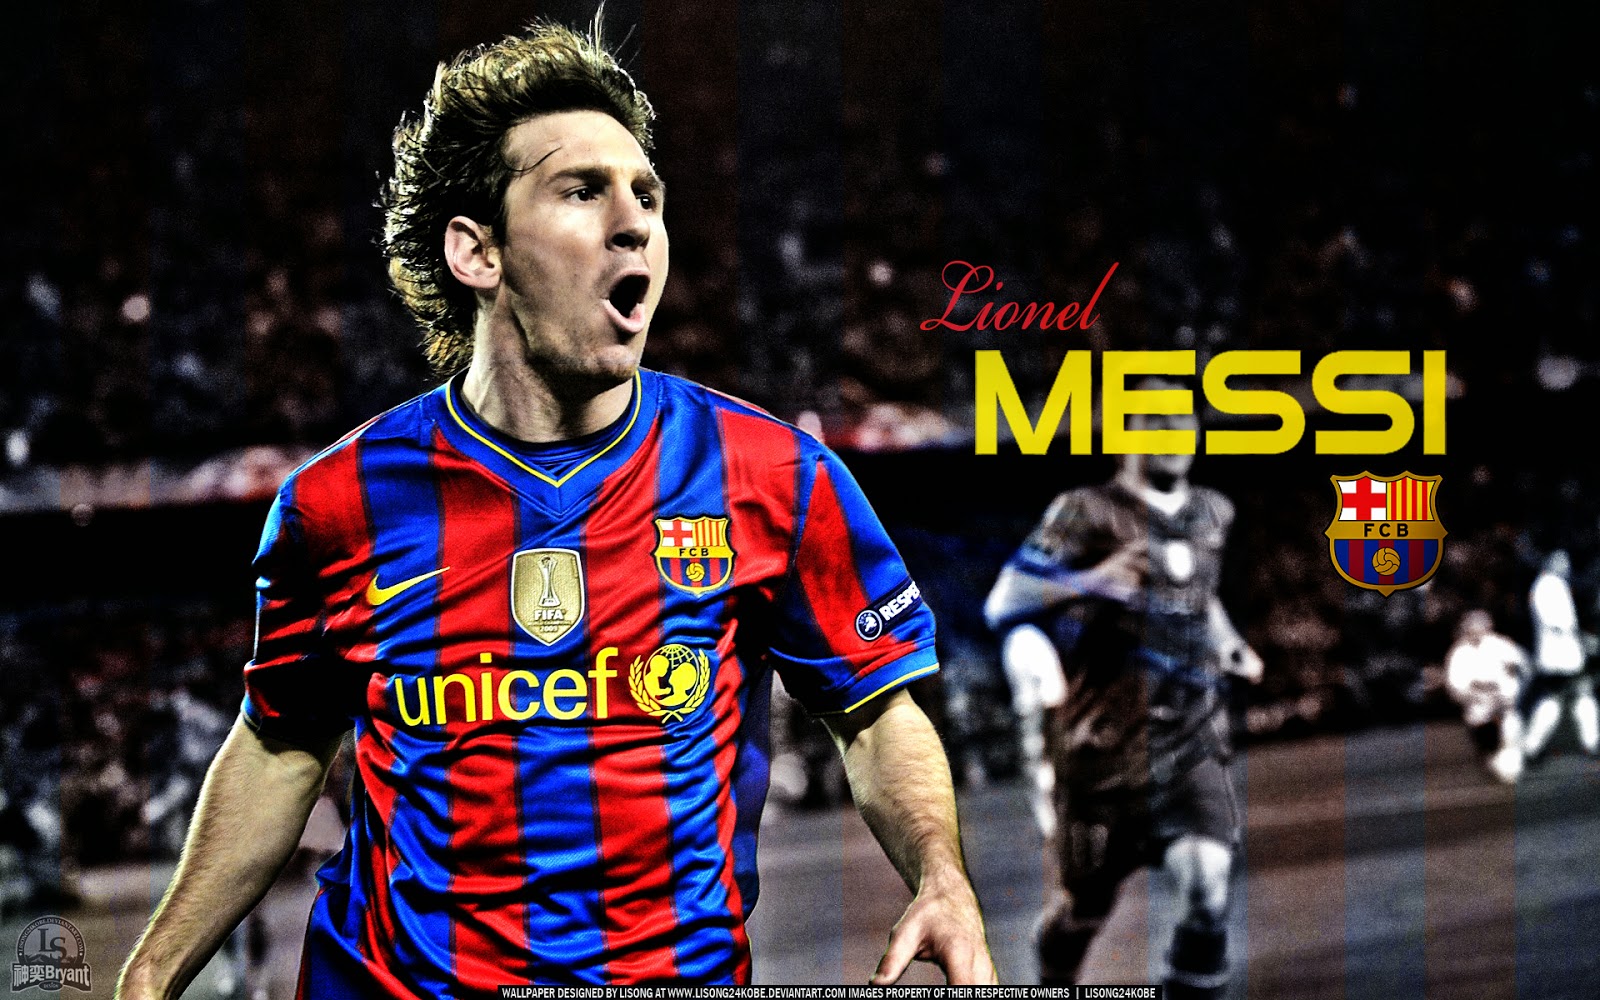 Lionel Messi HQ Wallpapers 2014 2015 1600x1000